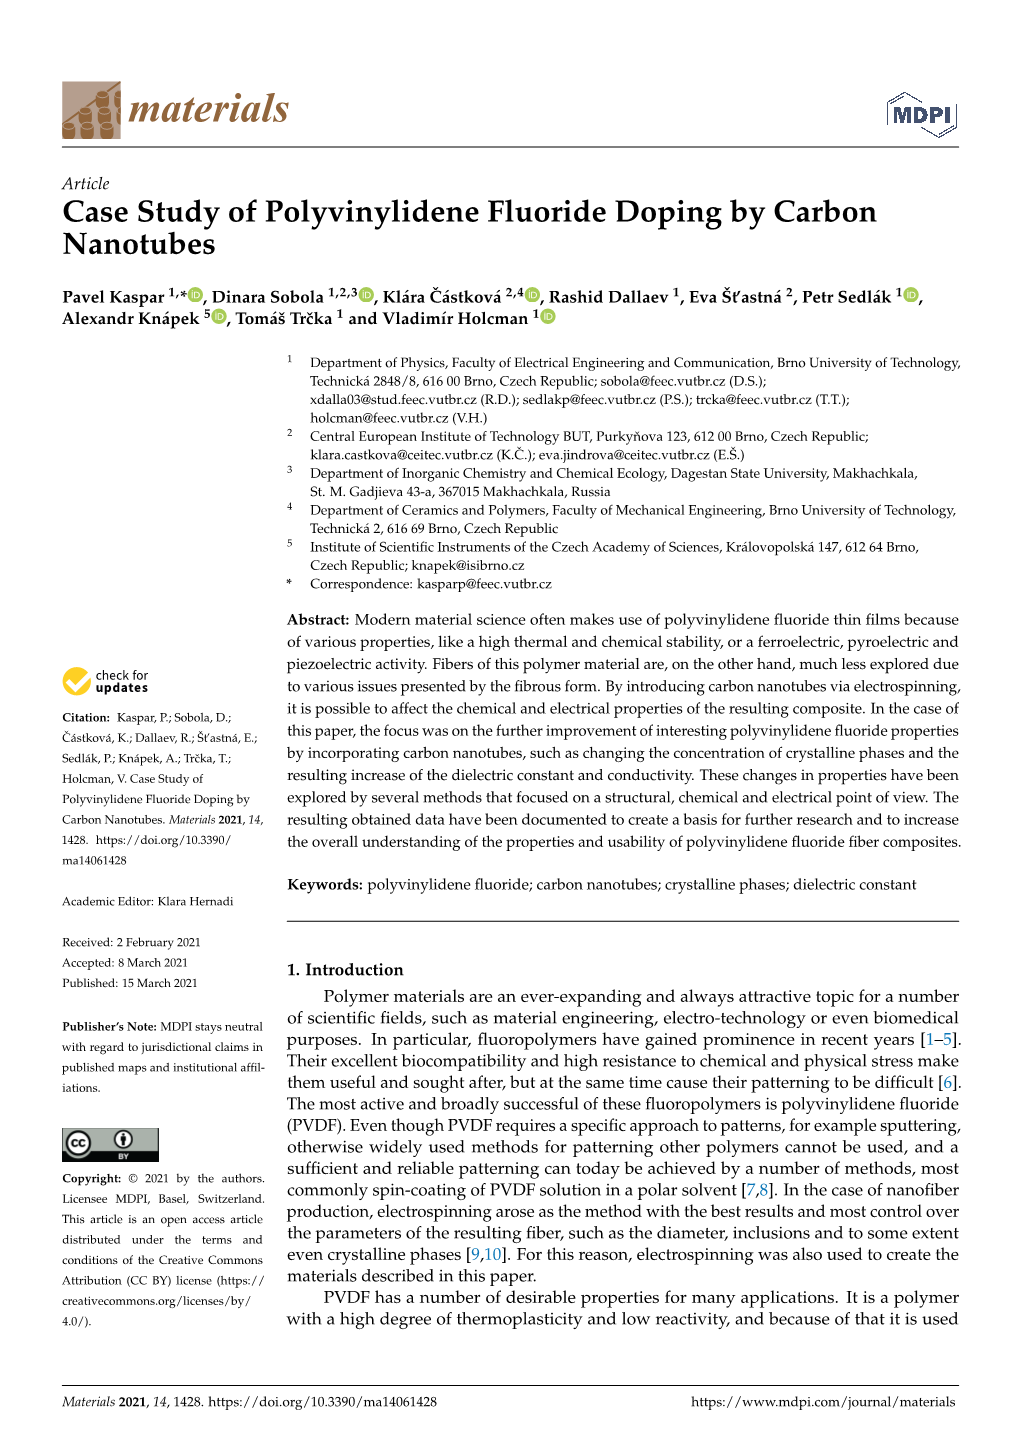 Case Study of Polyvinylidene Fluoride Doping by Carbon Nanotubes